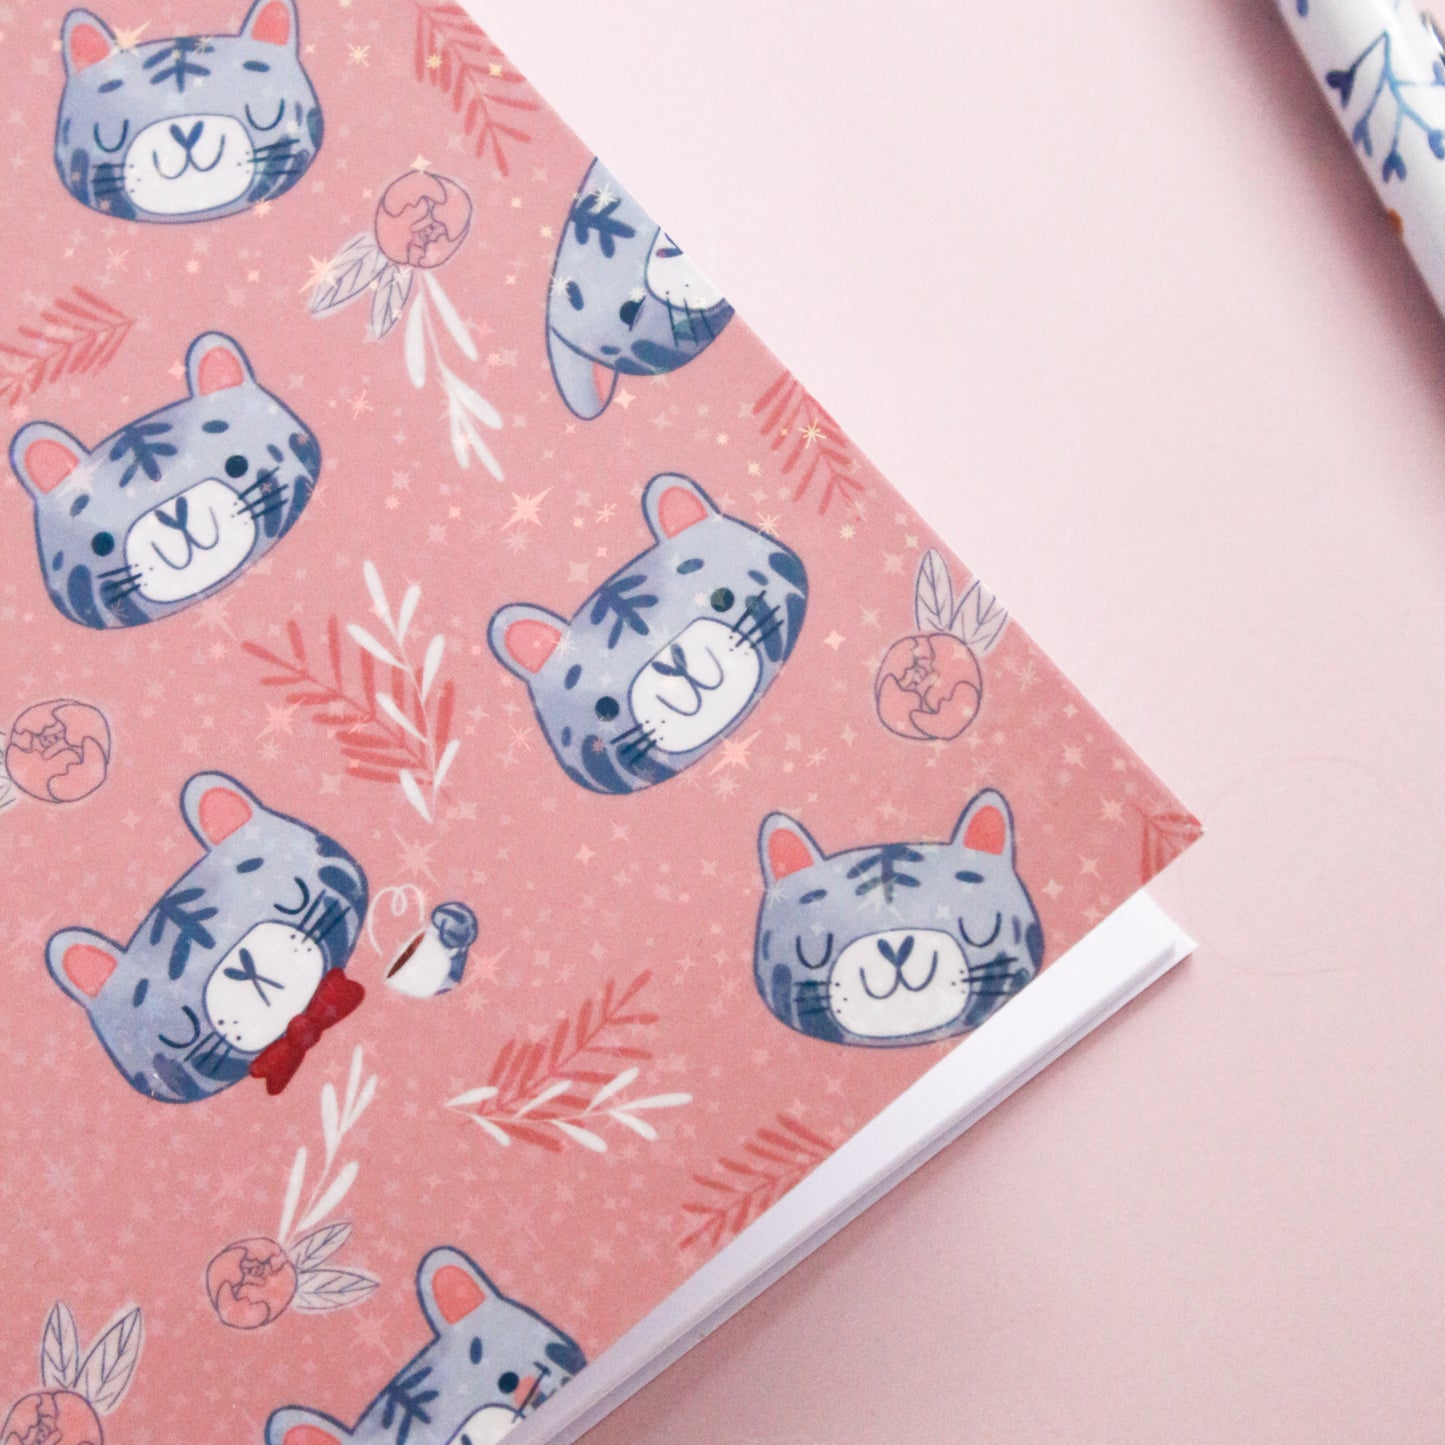 Cat and Tiger Holographic Notebook - Cute notebooks